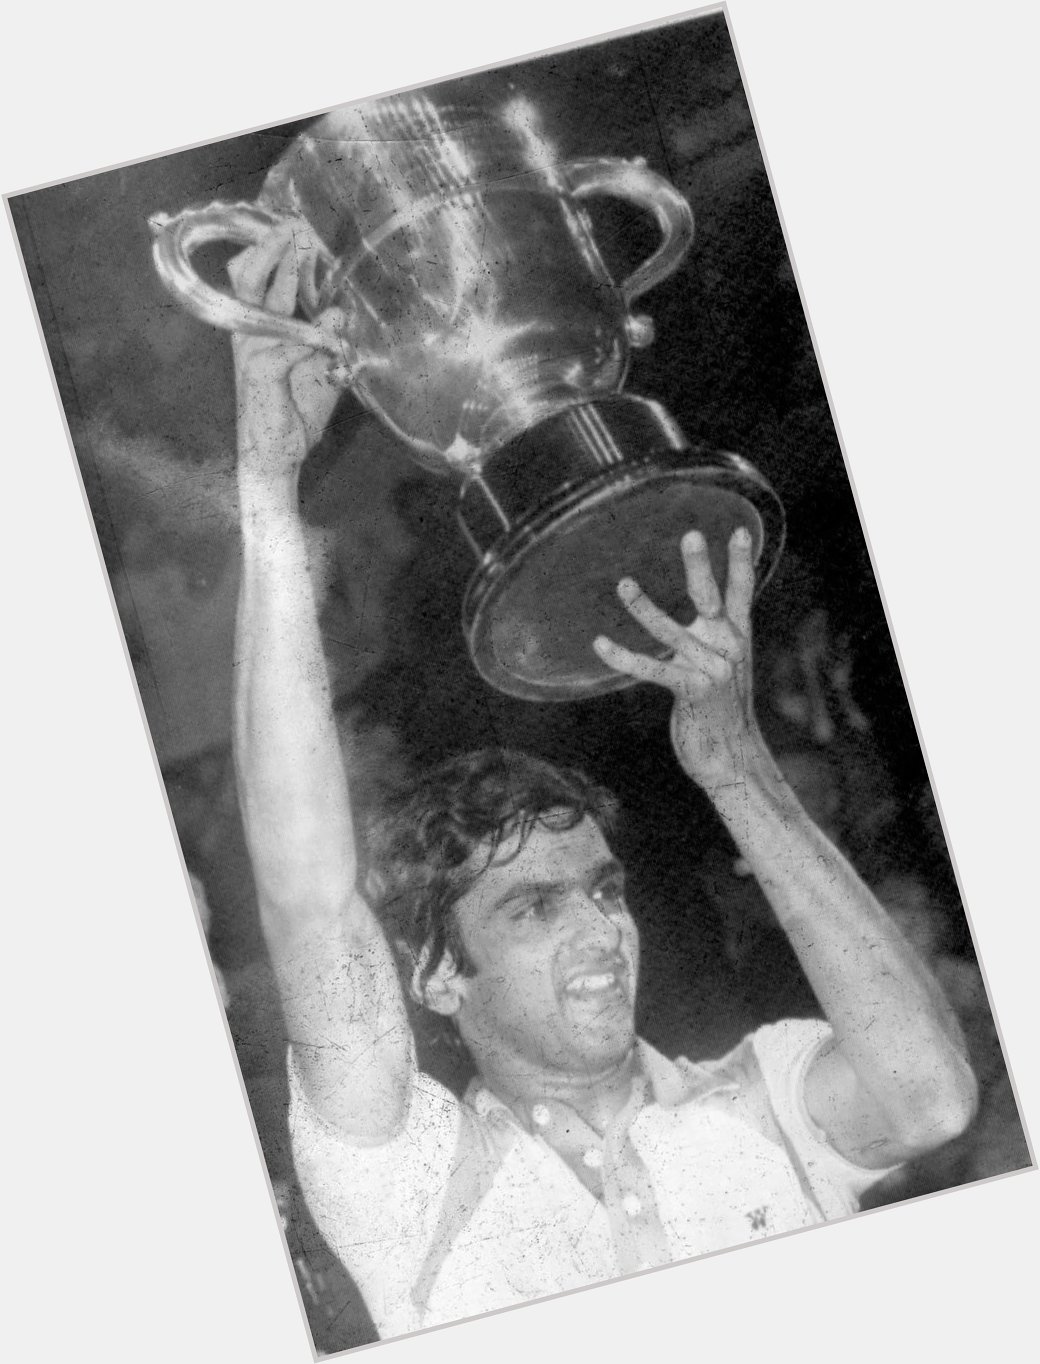 First Indian to become World no. 1
First Indian to win All England Open in 1980

HAPPY BIRTHDAY PRAKASH PADUKONE 